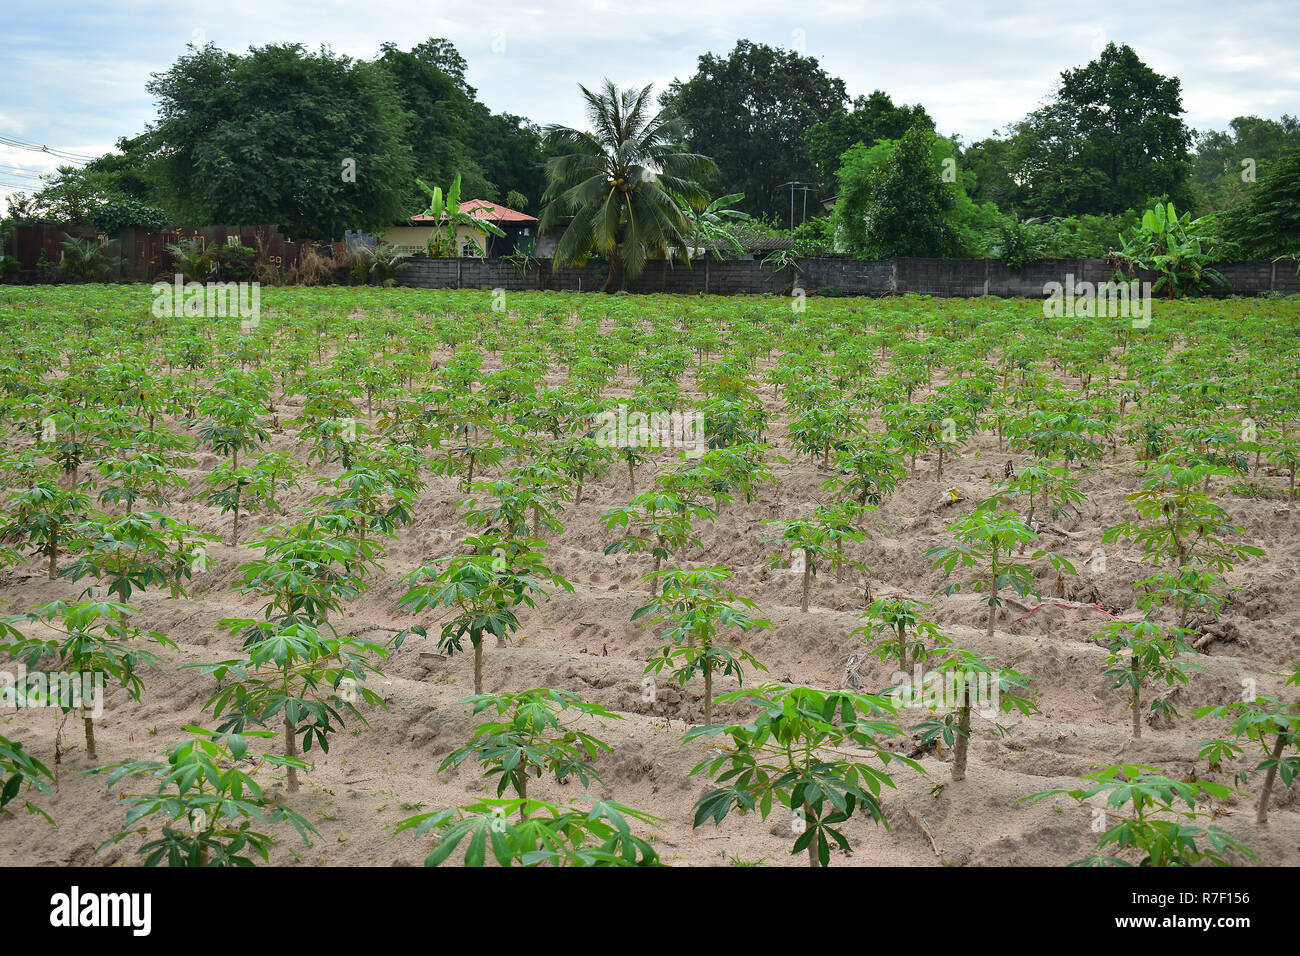 Asia Industry of Cassava Agriculture Stock Photo